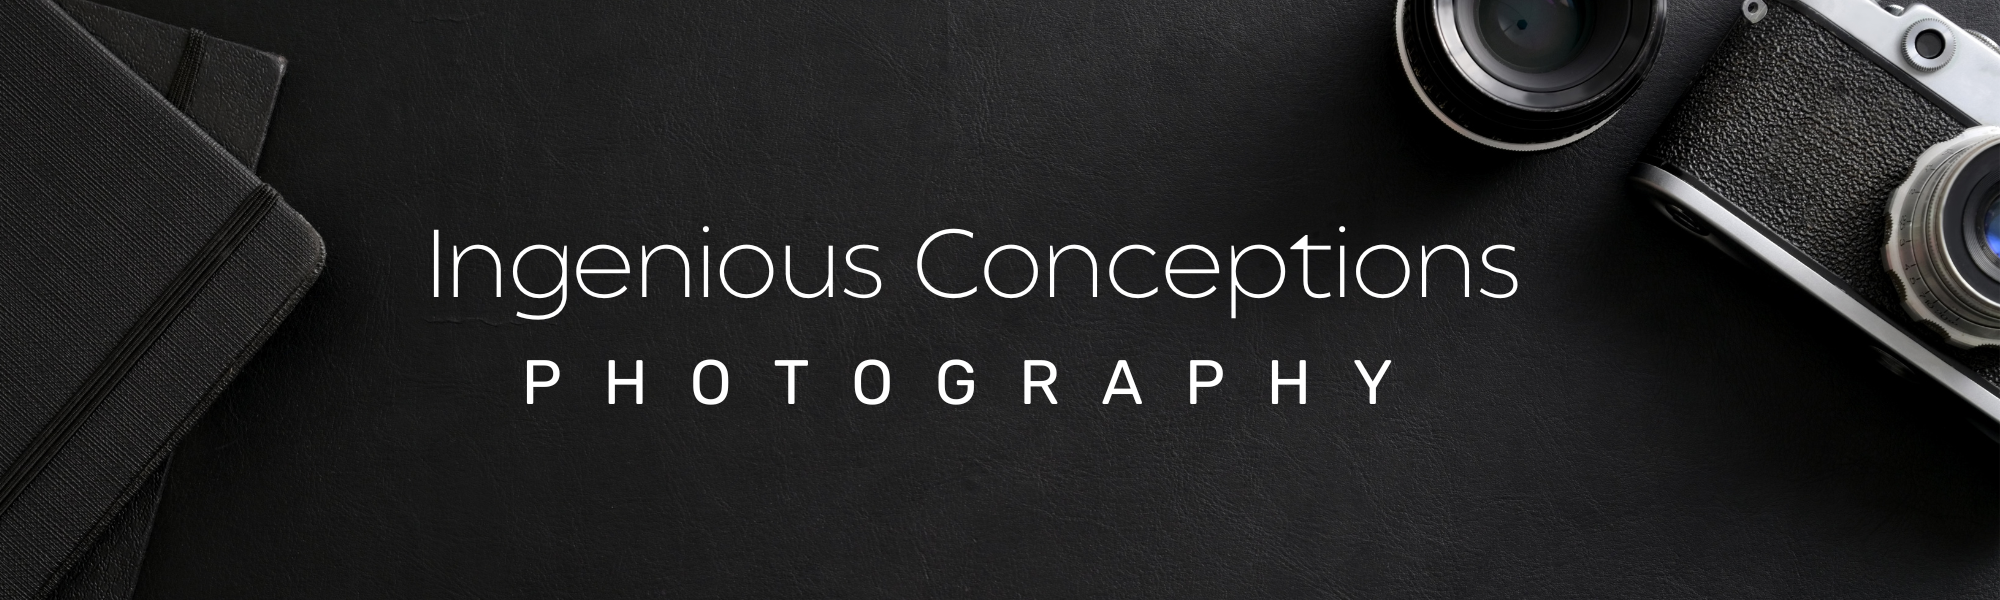 Photography banner